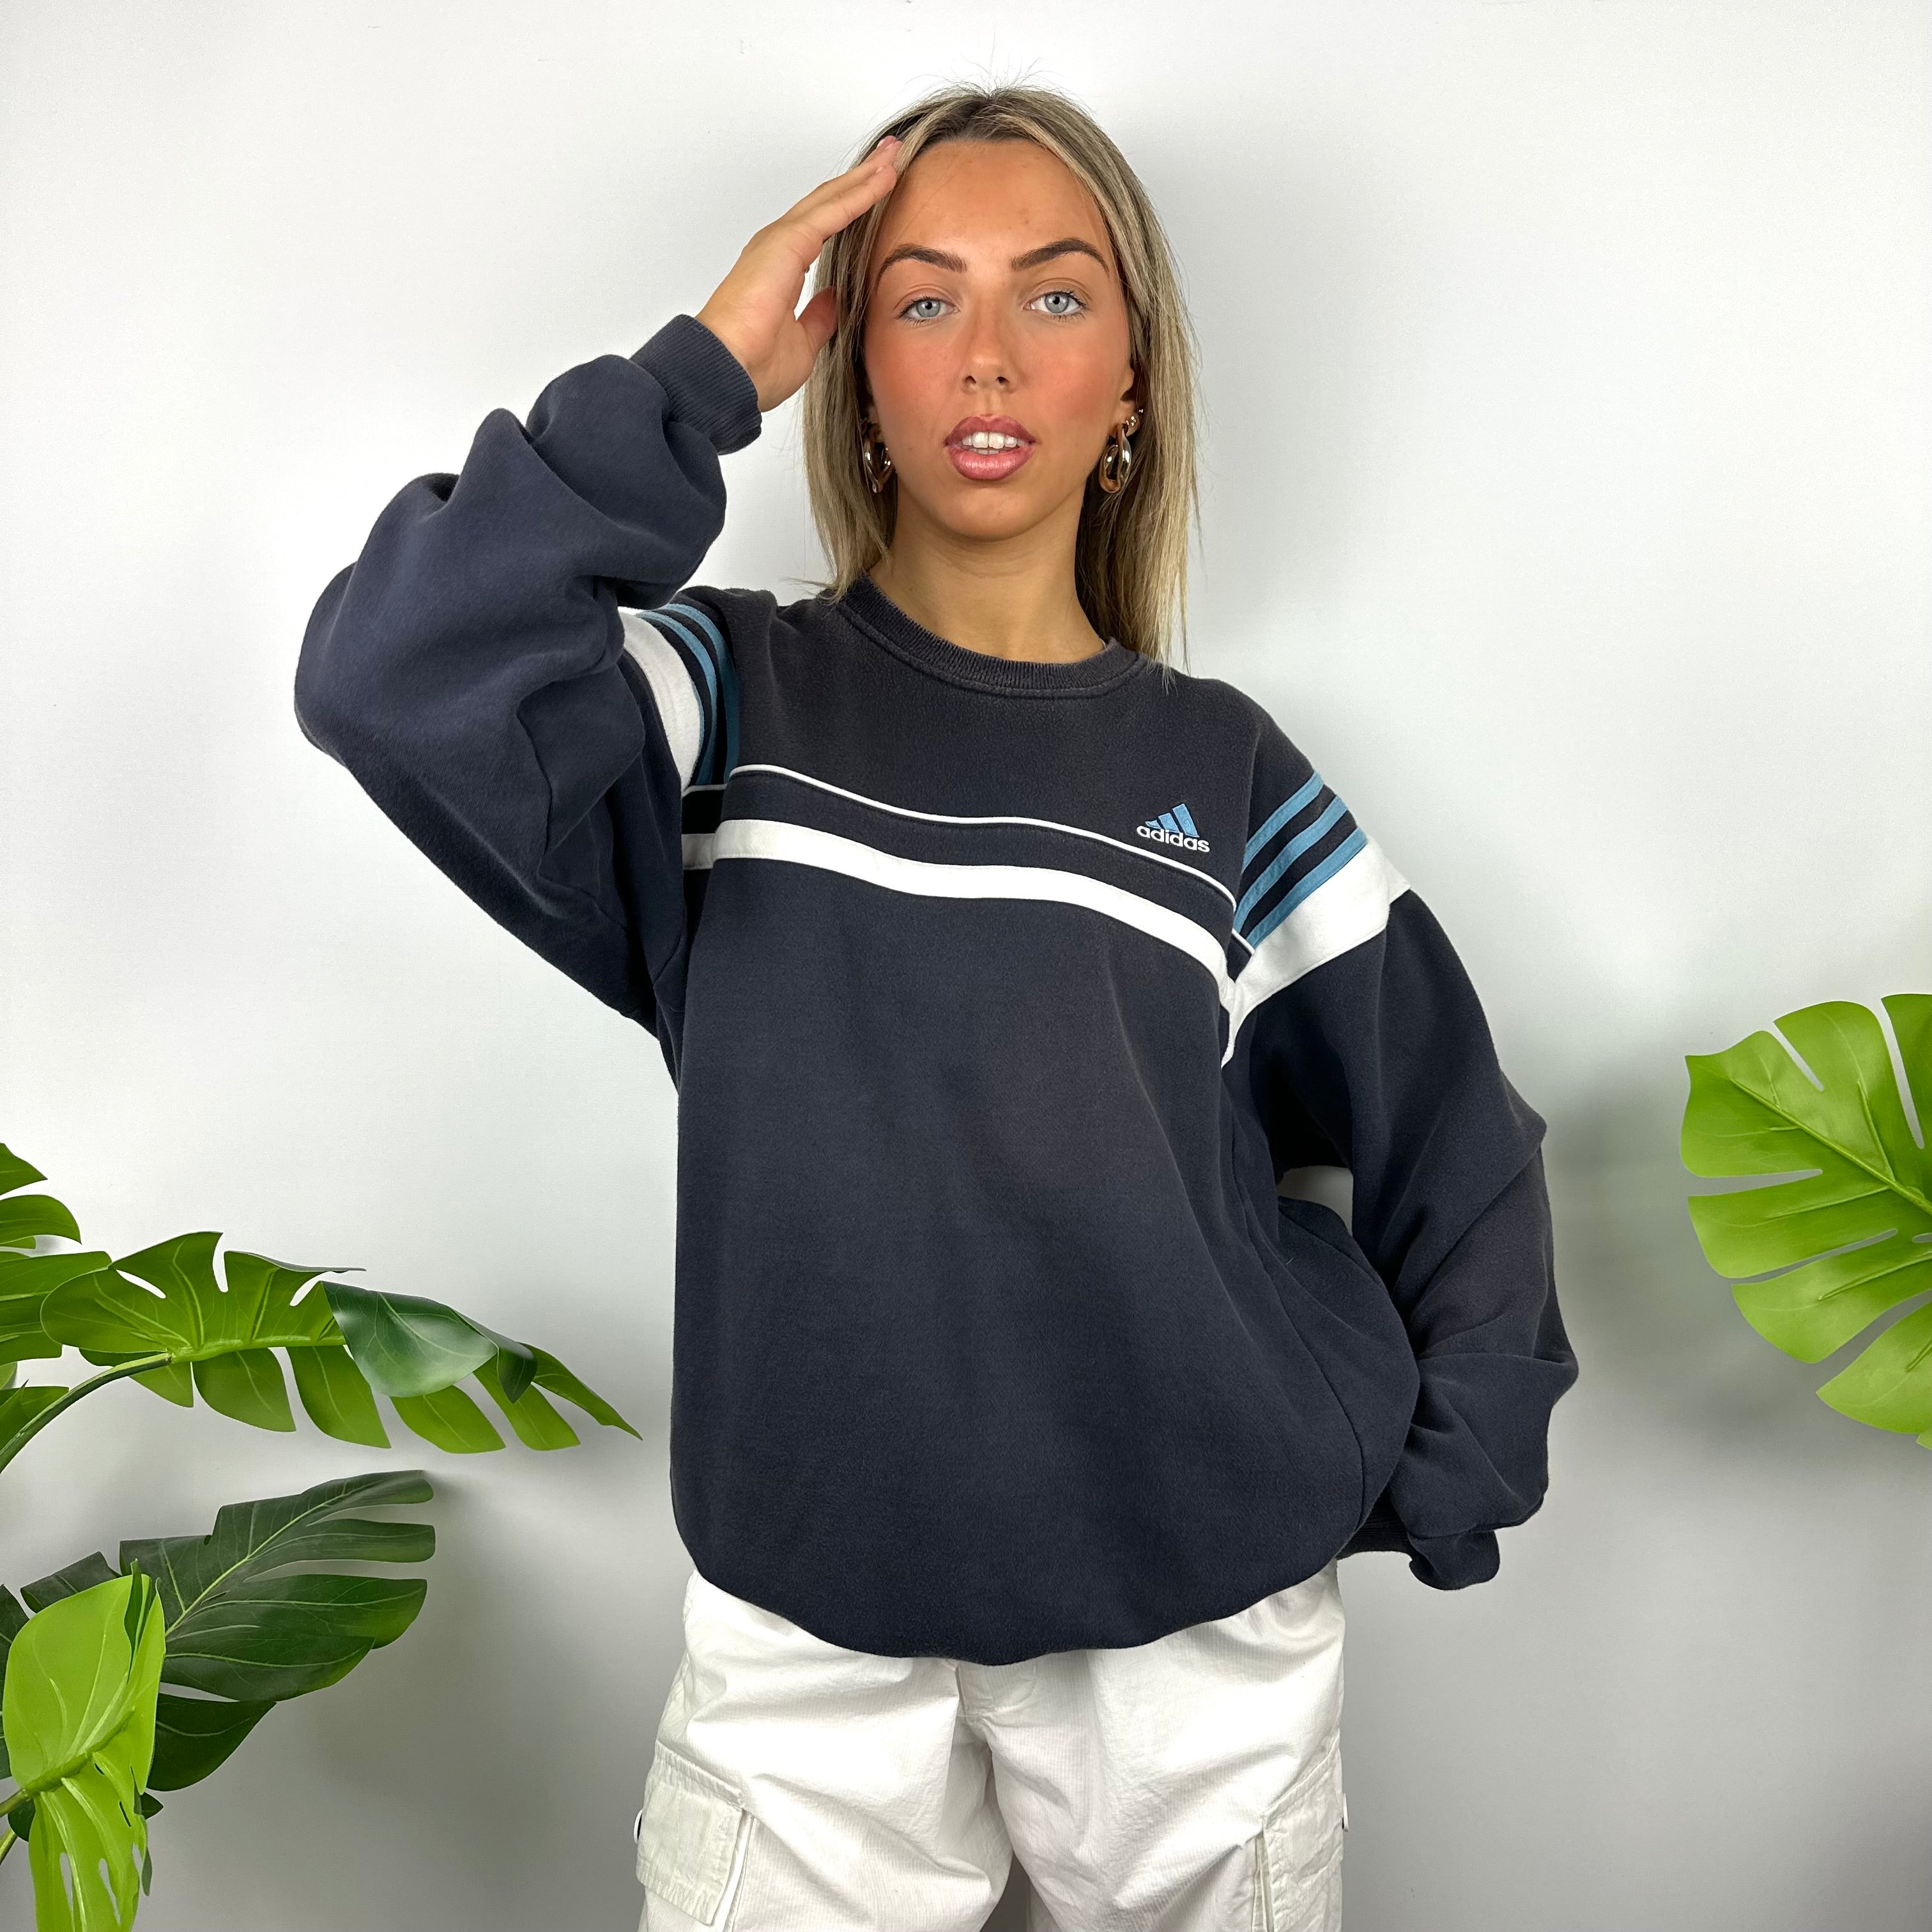 Adidas Navy Embroidered Spell Out Sweatshirt (L)